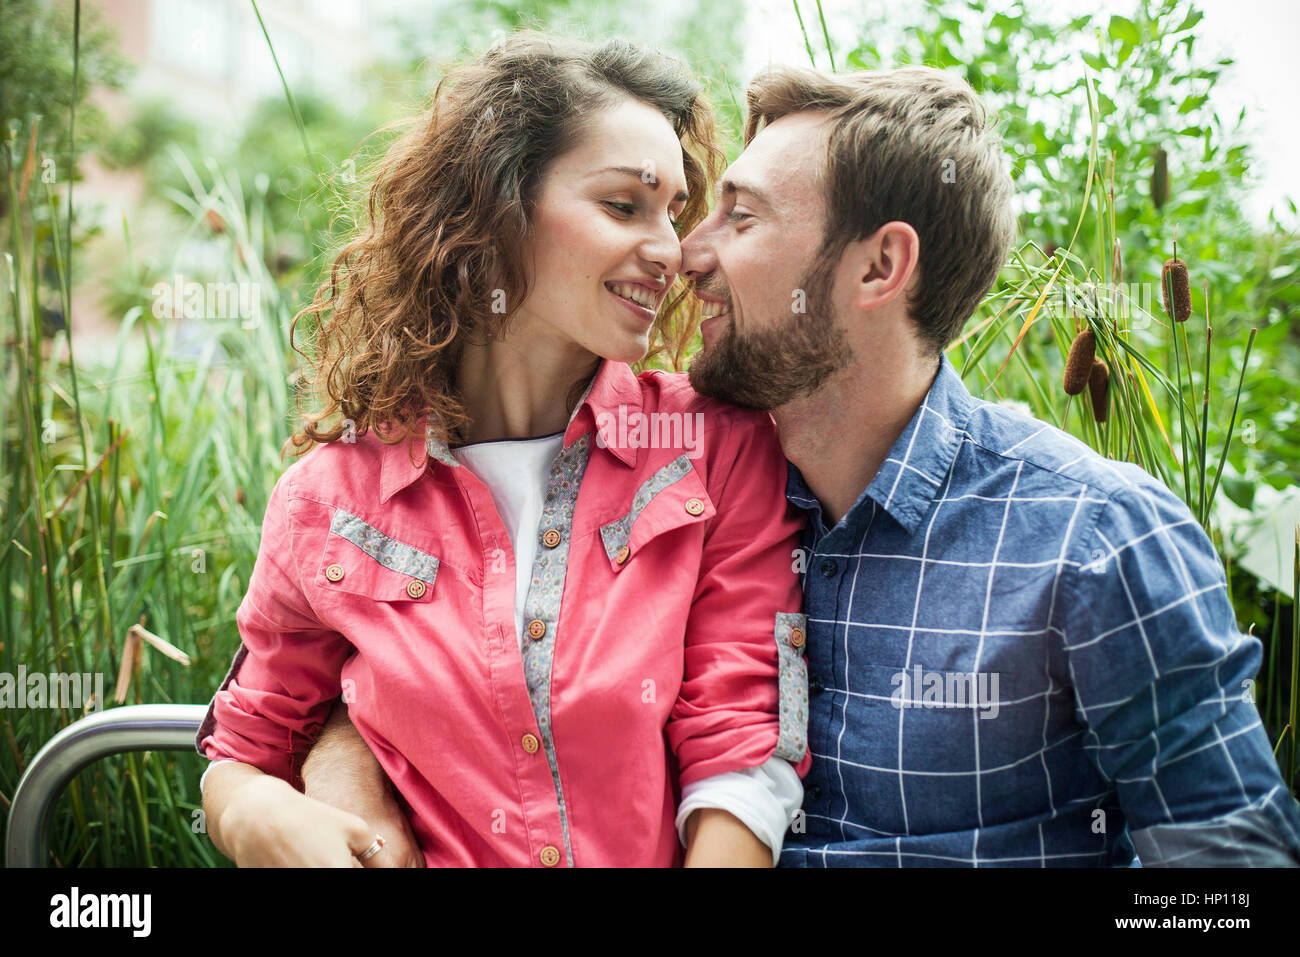 Young couple nuzzling outdoors Stock Photo